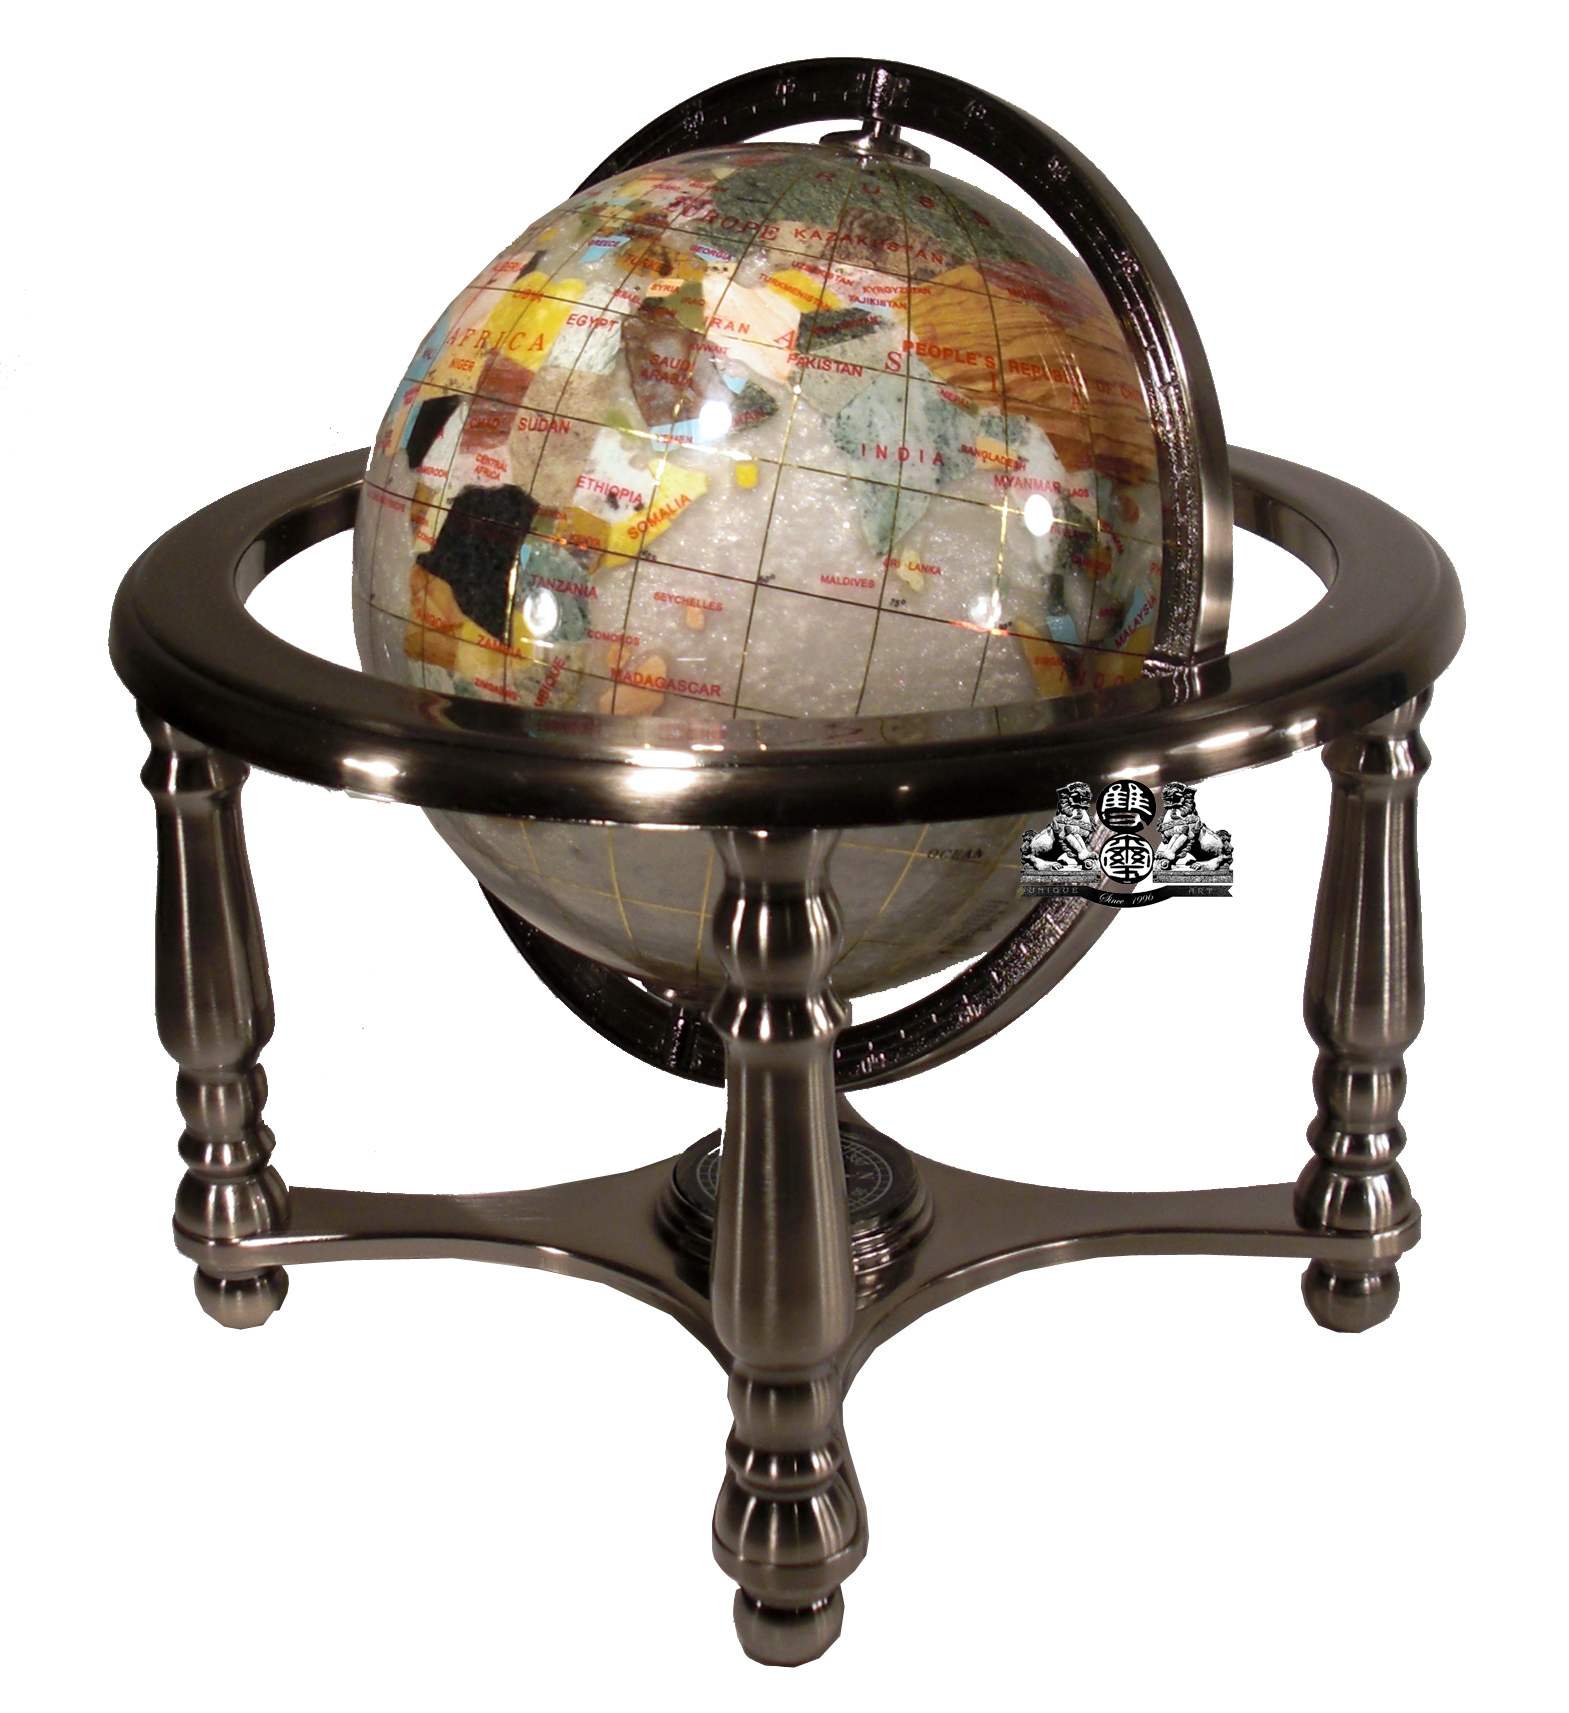 unique art gemstone globes 10 inches tall 150mm diameter table stand